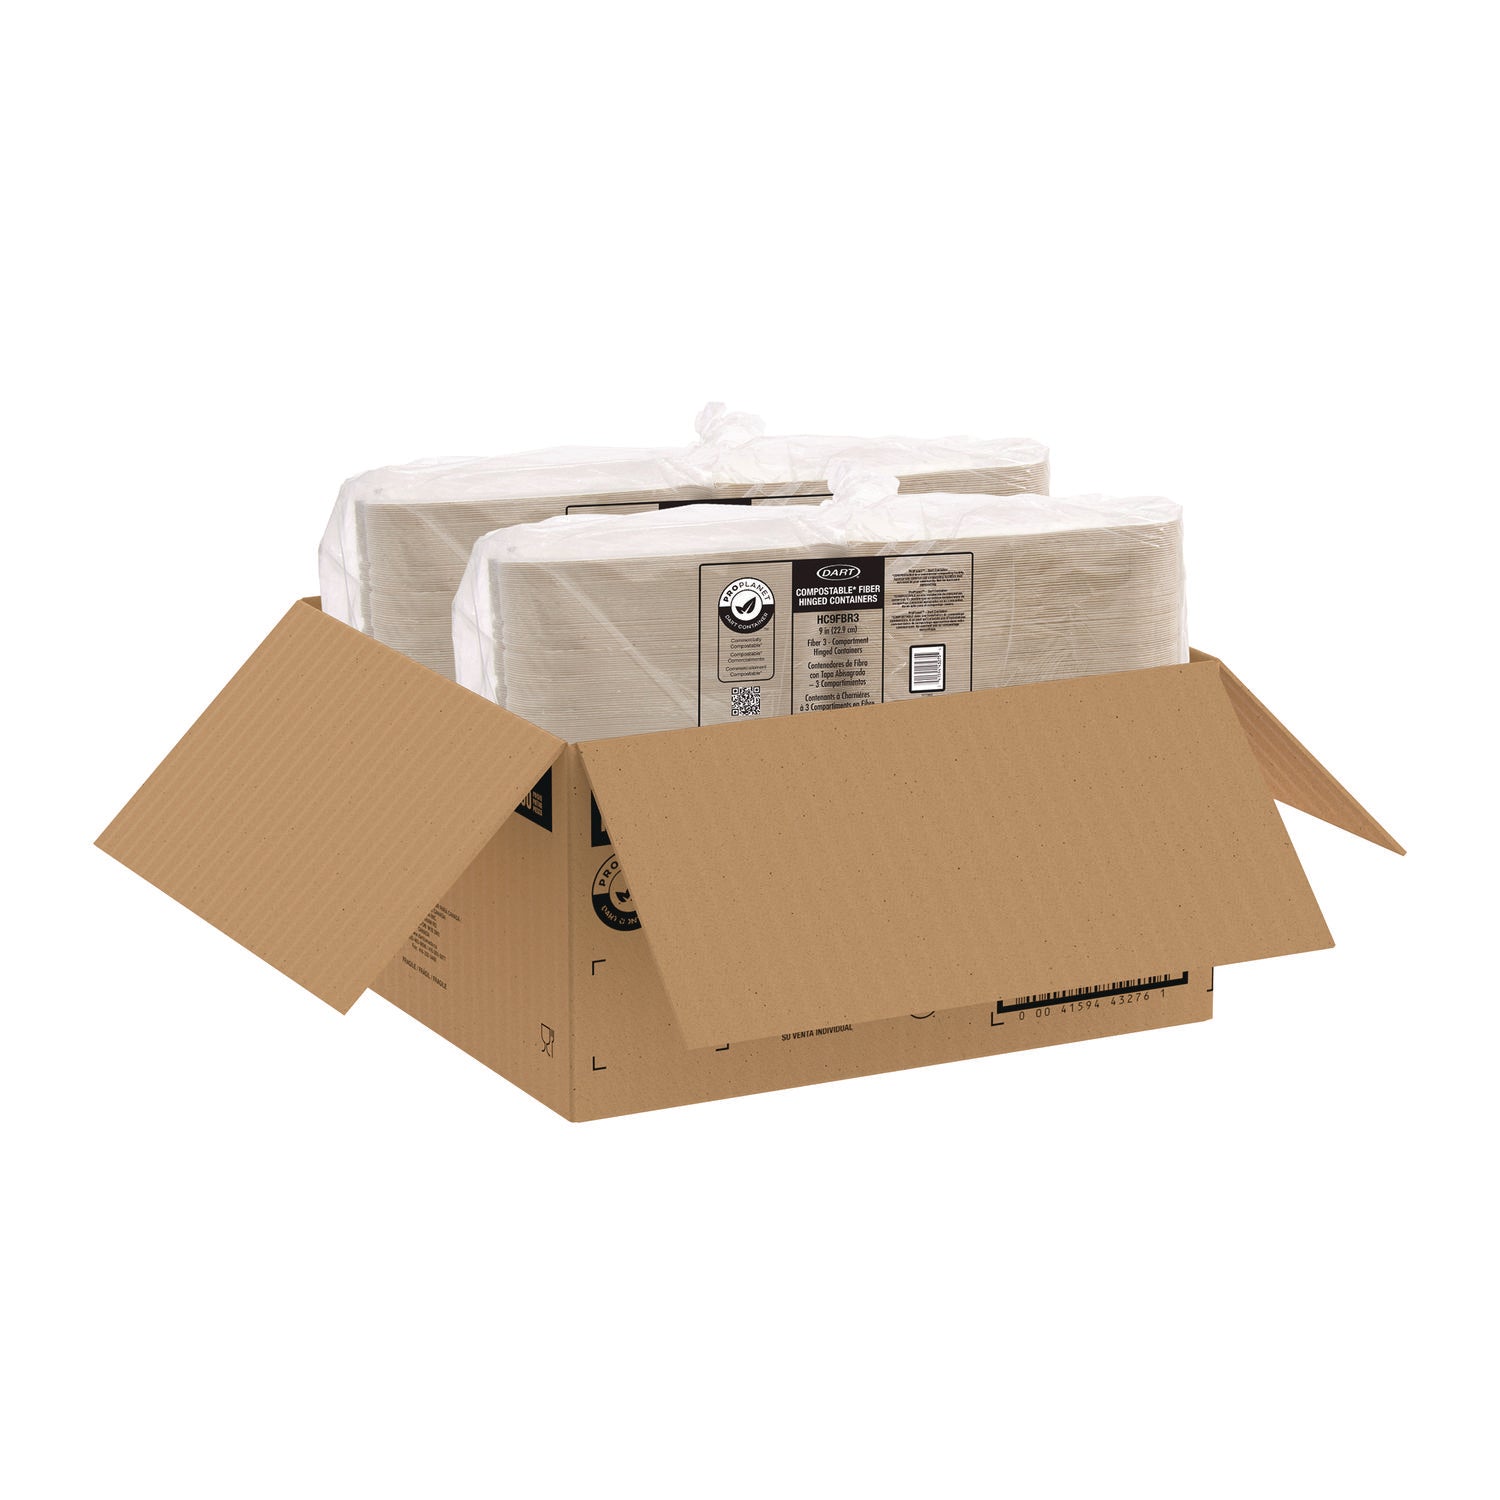 compostable-fiber-hinged-trays-proplanet-seal-3-compartment-925-x-945-x-217-ivory-molded-fiber-200-carton_dcchc9fbr3 - 4